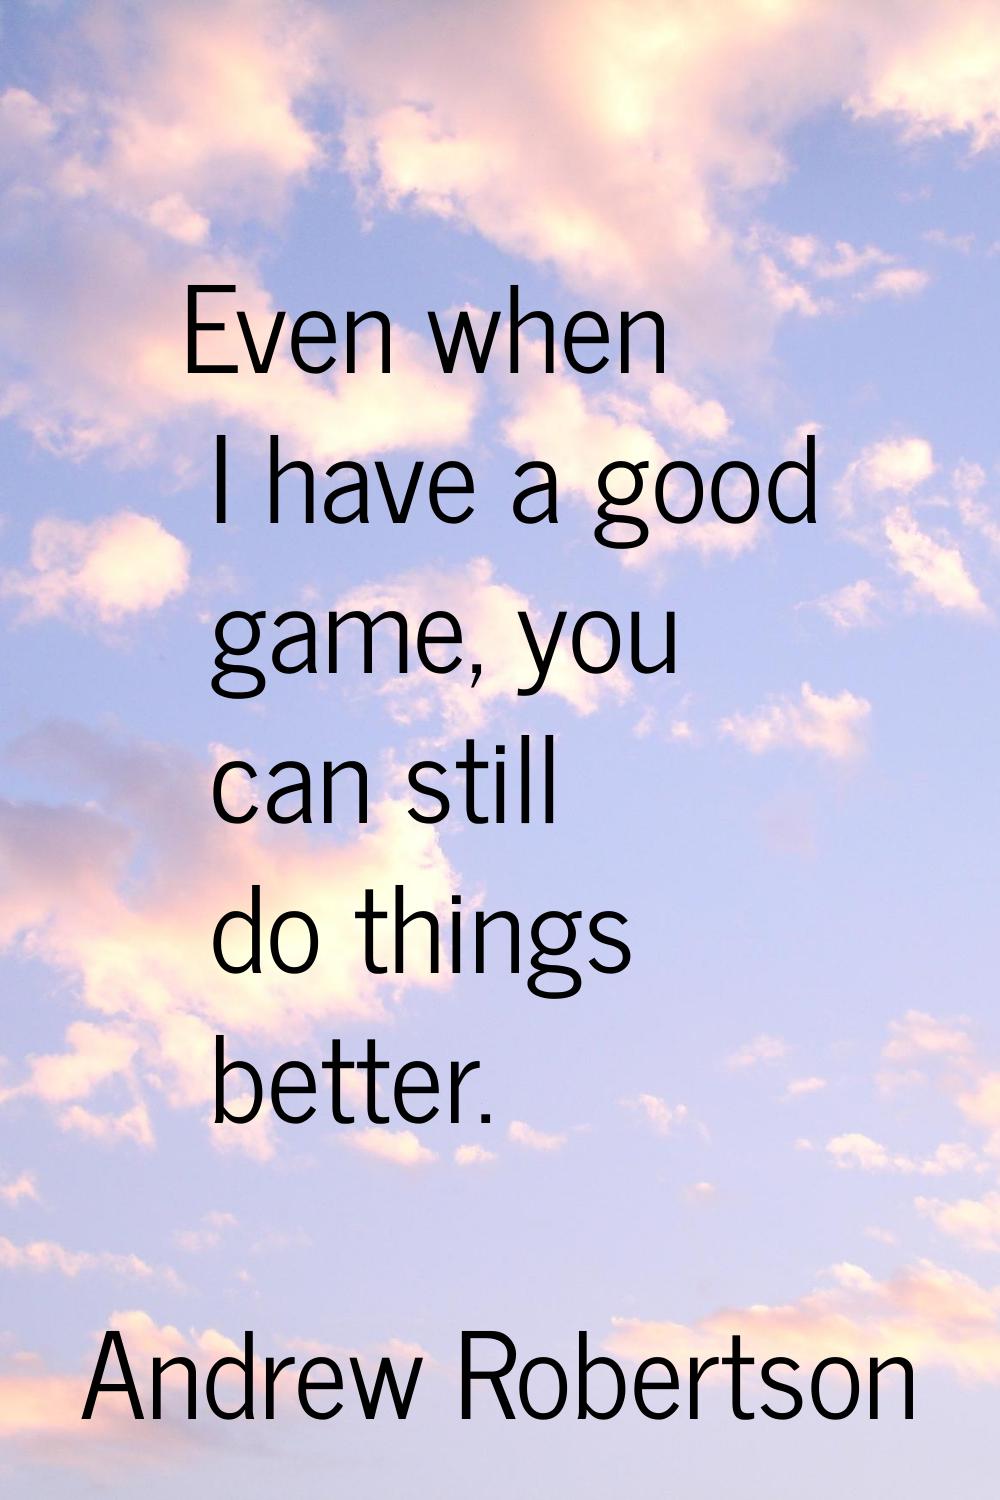 Even when I have a good game, you can still do things better.